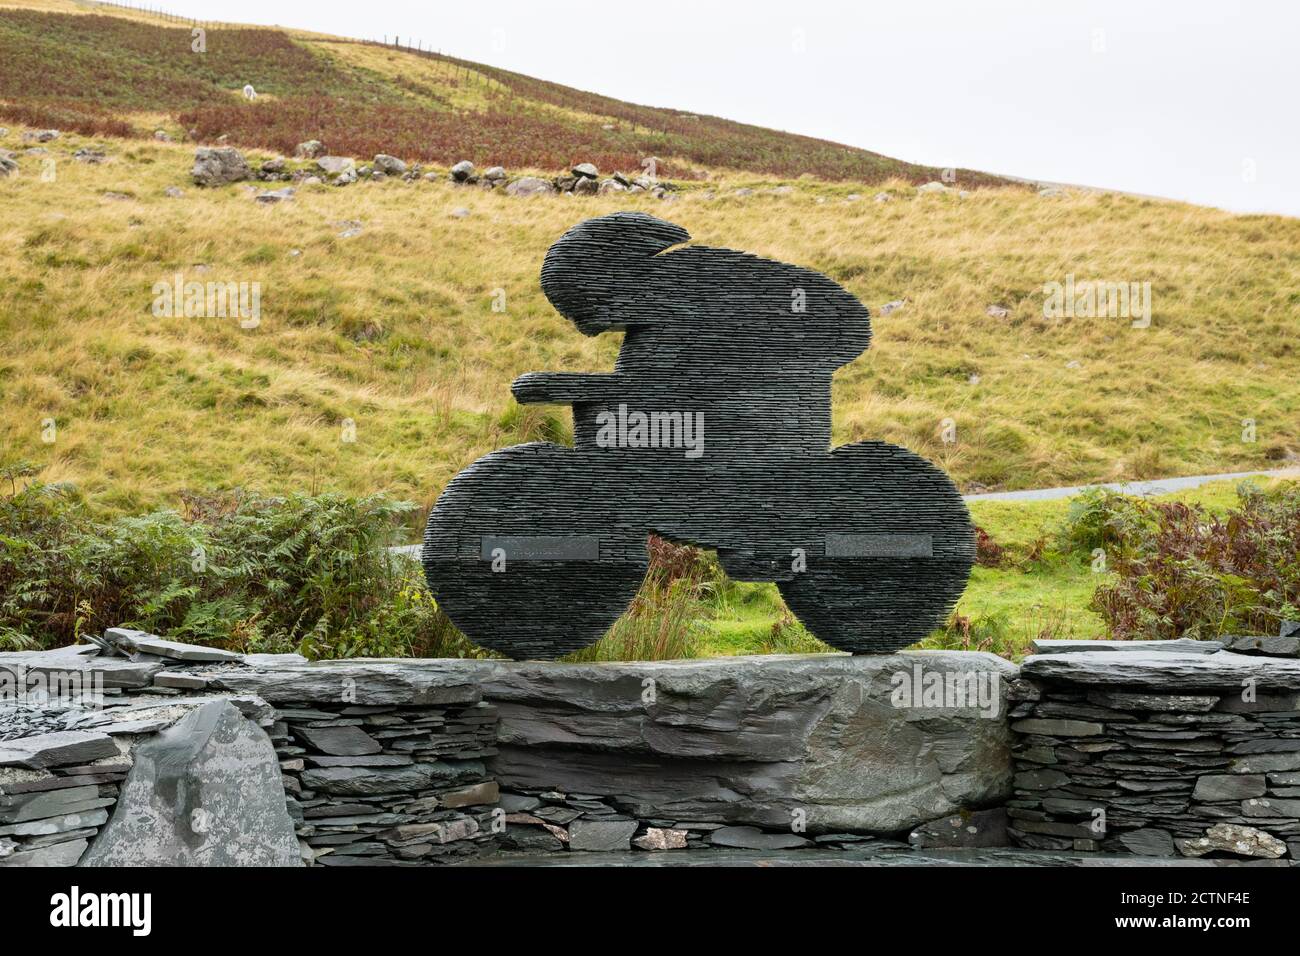 sculpture 'Endurance' of a cyclist made from slate by Terry Hawkins at Honister Slate Mine, Honister Pass, Lake District, England, UK Stock Photo